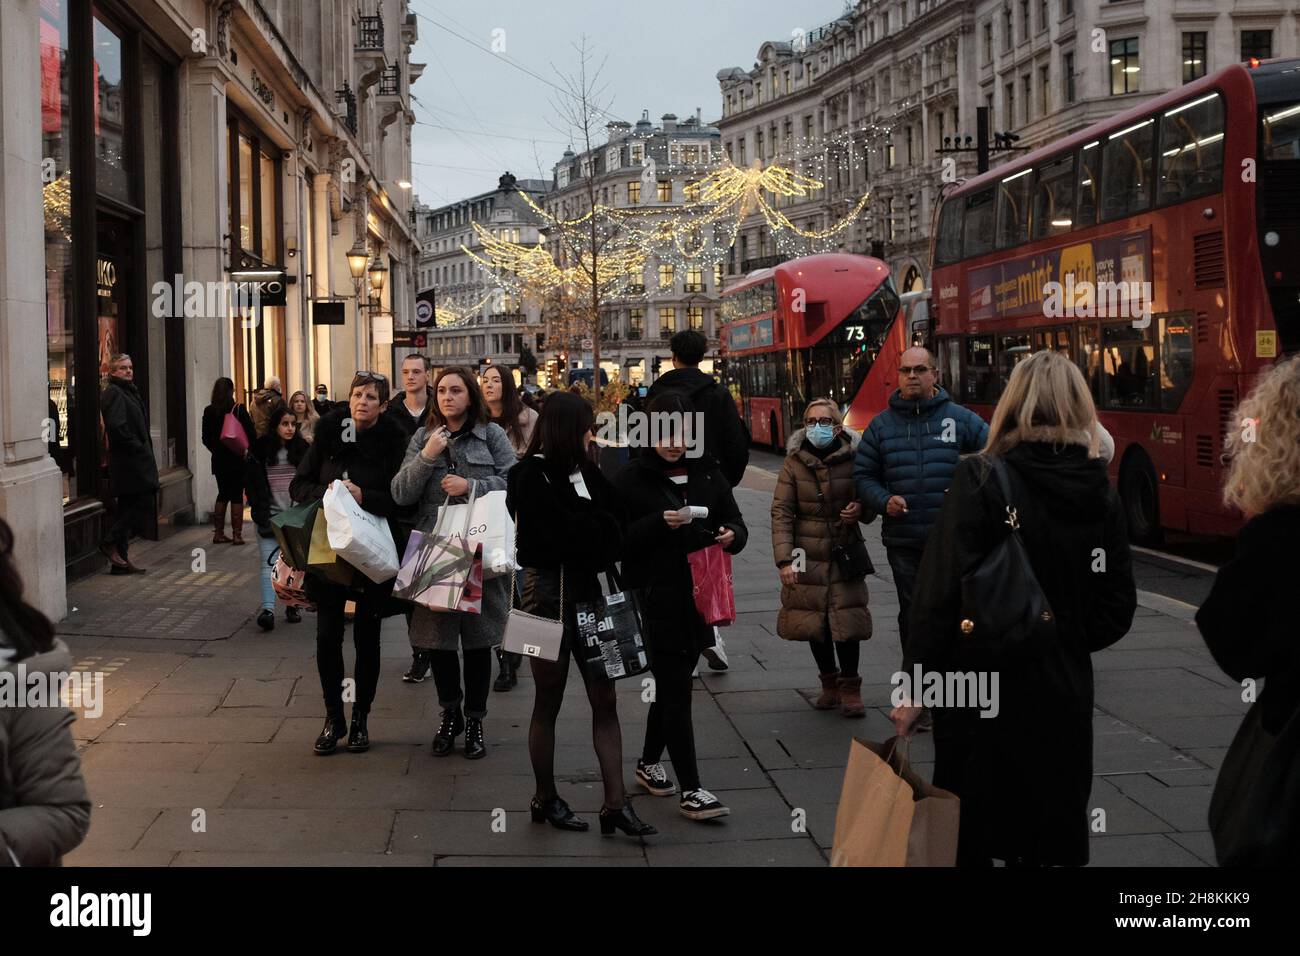 London, Britain. 24th Nov, 2021. People with shopping bags walk on Regent Street in London, Britain, Nov. 24, 2021. Consumers across Britain are expected to face higher prices and fewer choices for goods this Christmas season due to supply chain delays and soaring inflation. TO GO WITH "Economic Watch: Supply chain delays, inflation surge across UK may lead to "tough" Christmas" Credit: Tim Ireland/Xinhua/Alamy Live News Stock Photo